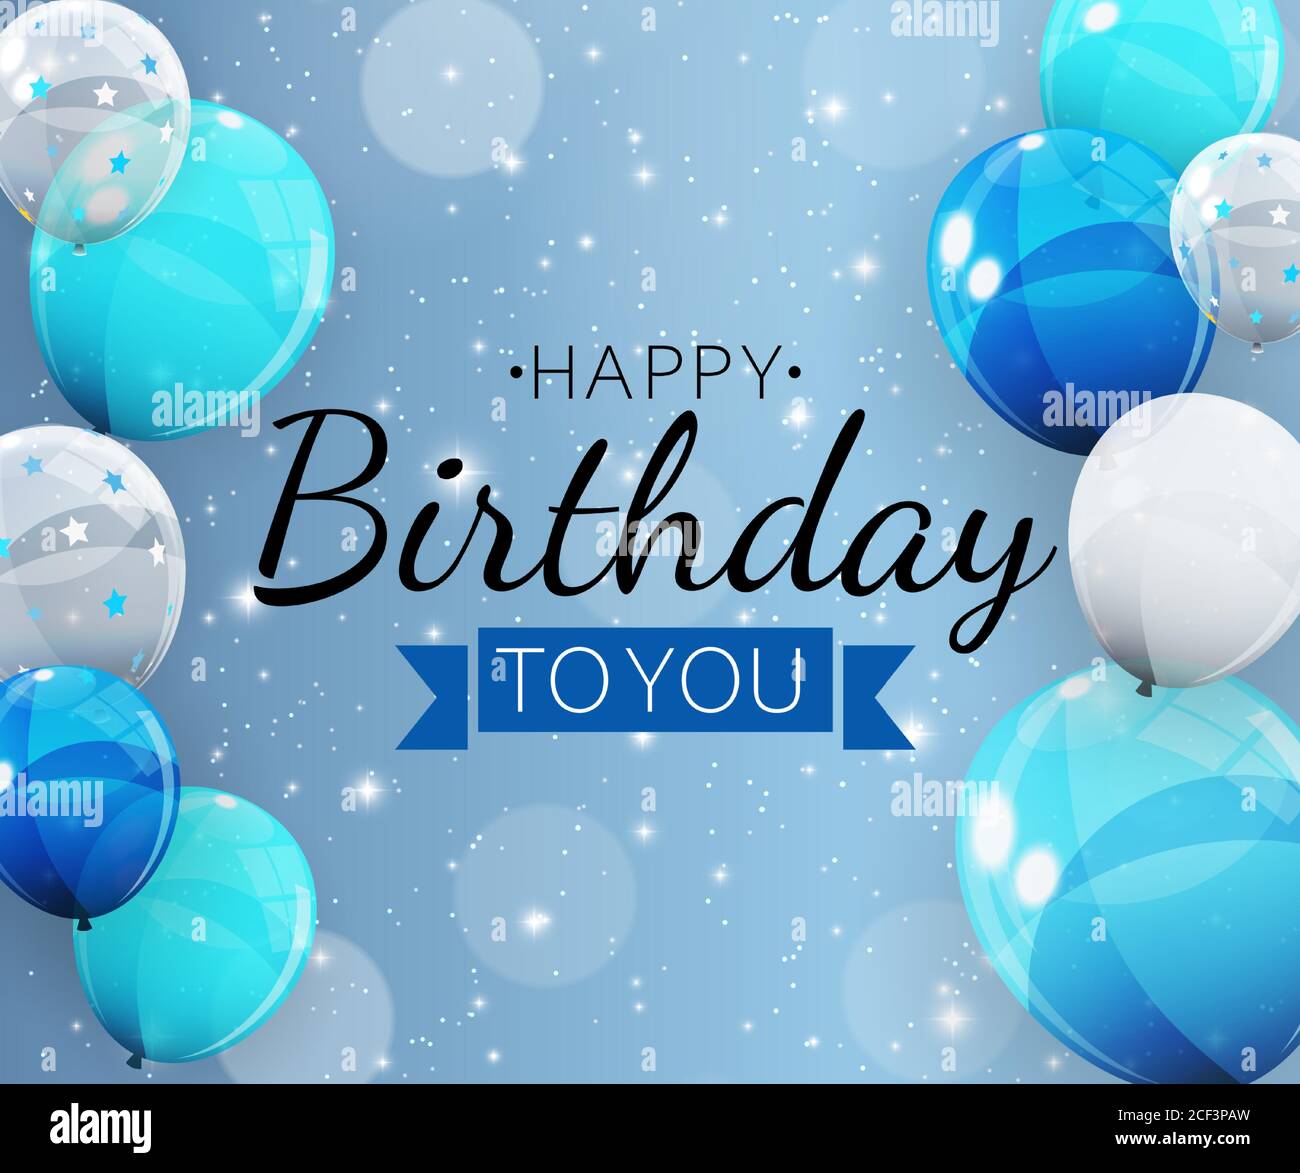 Happy Birthday Background with Balloons. Vector Illustration Stock ...